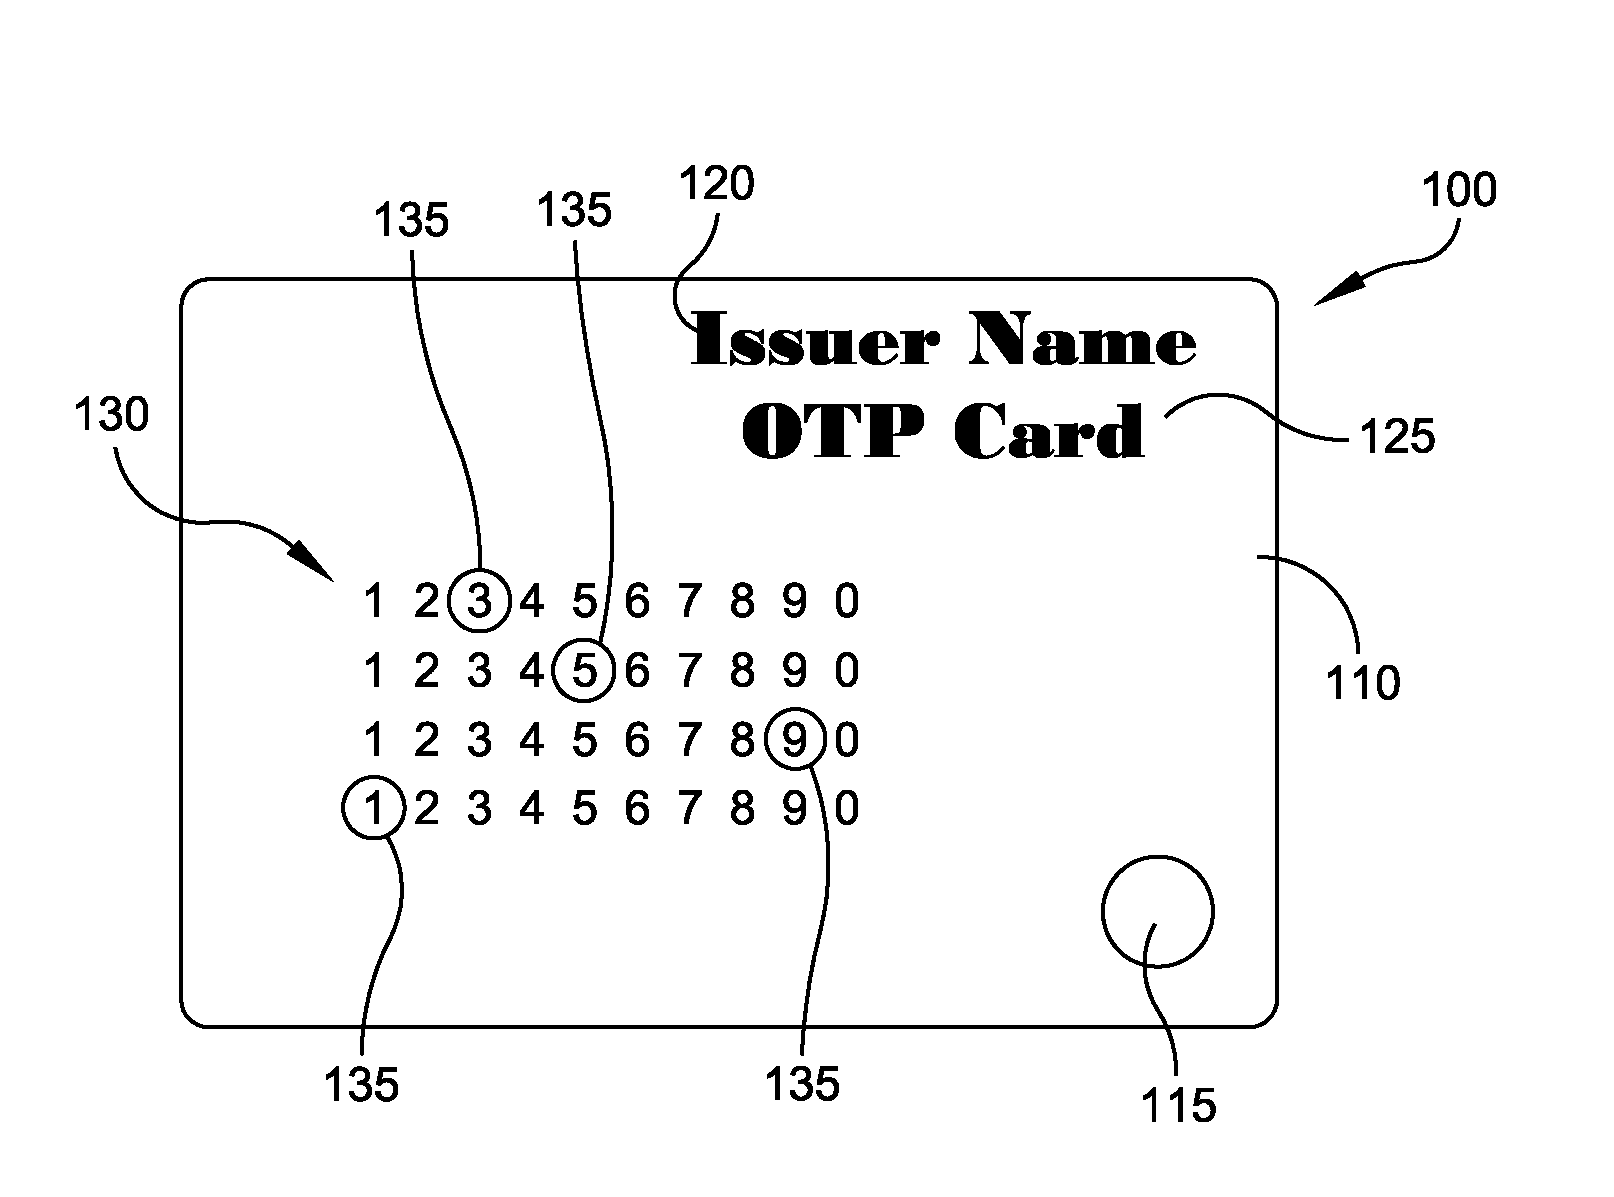 Card with illuminated codes for use in secure transactions